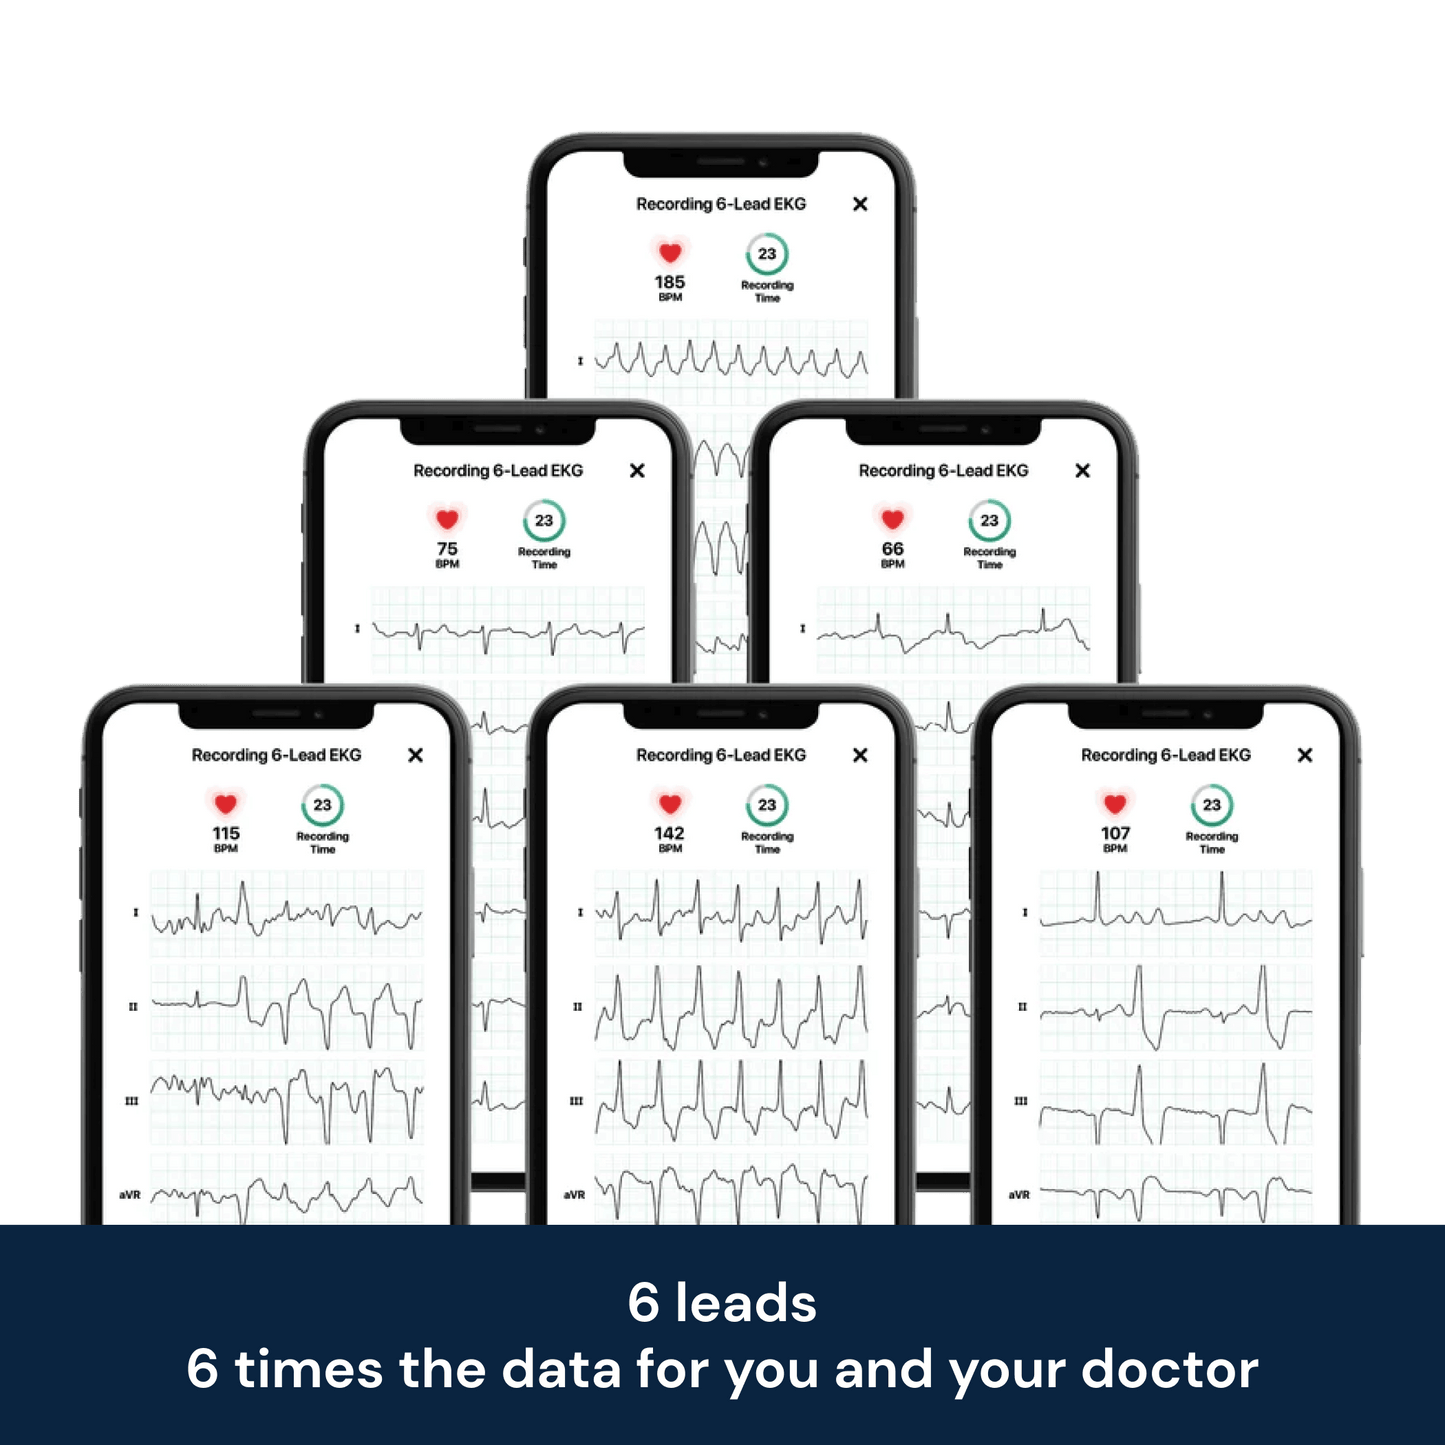  KardiaMobile 6-Lead Personal EKG Monitor – Six Views of The  Heart – Detects AFib and Irregular Arrhythmias – Instant Results in 30  Seconds – Works with Most Smartphones - FSA/HSA Eligible 